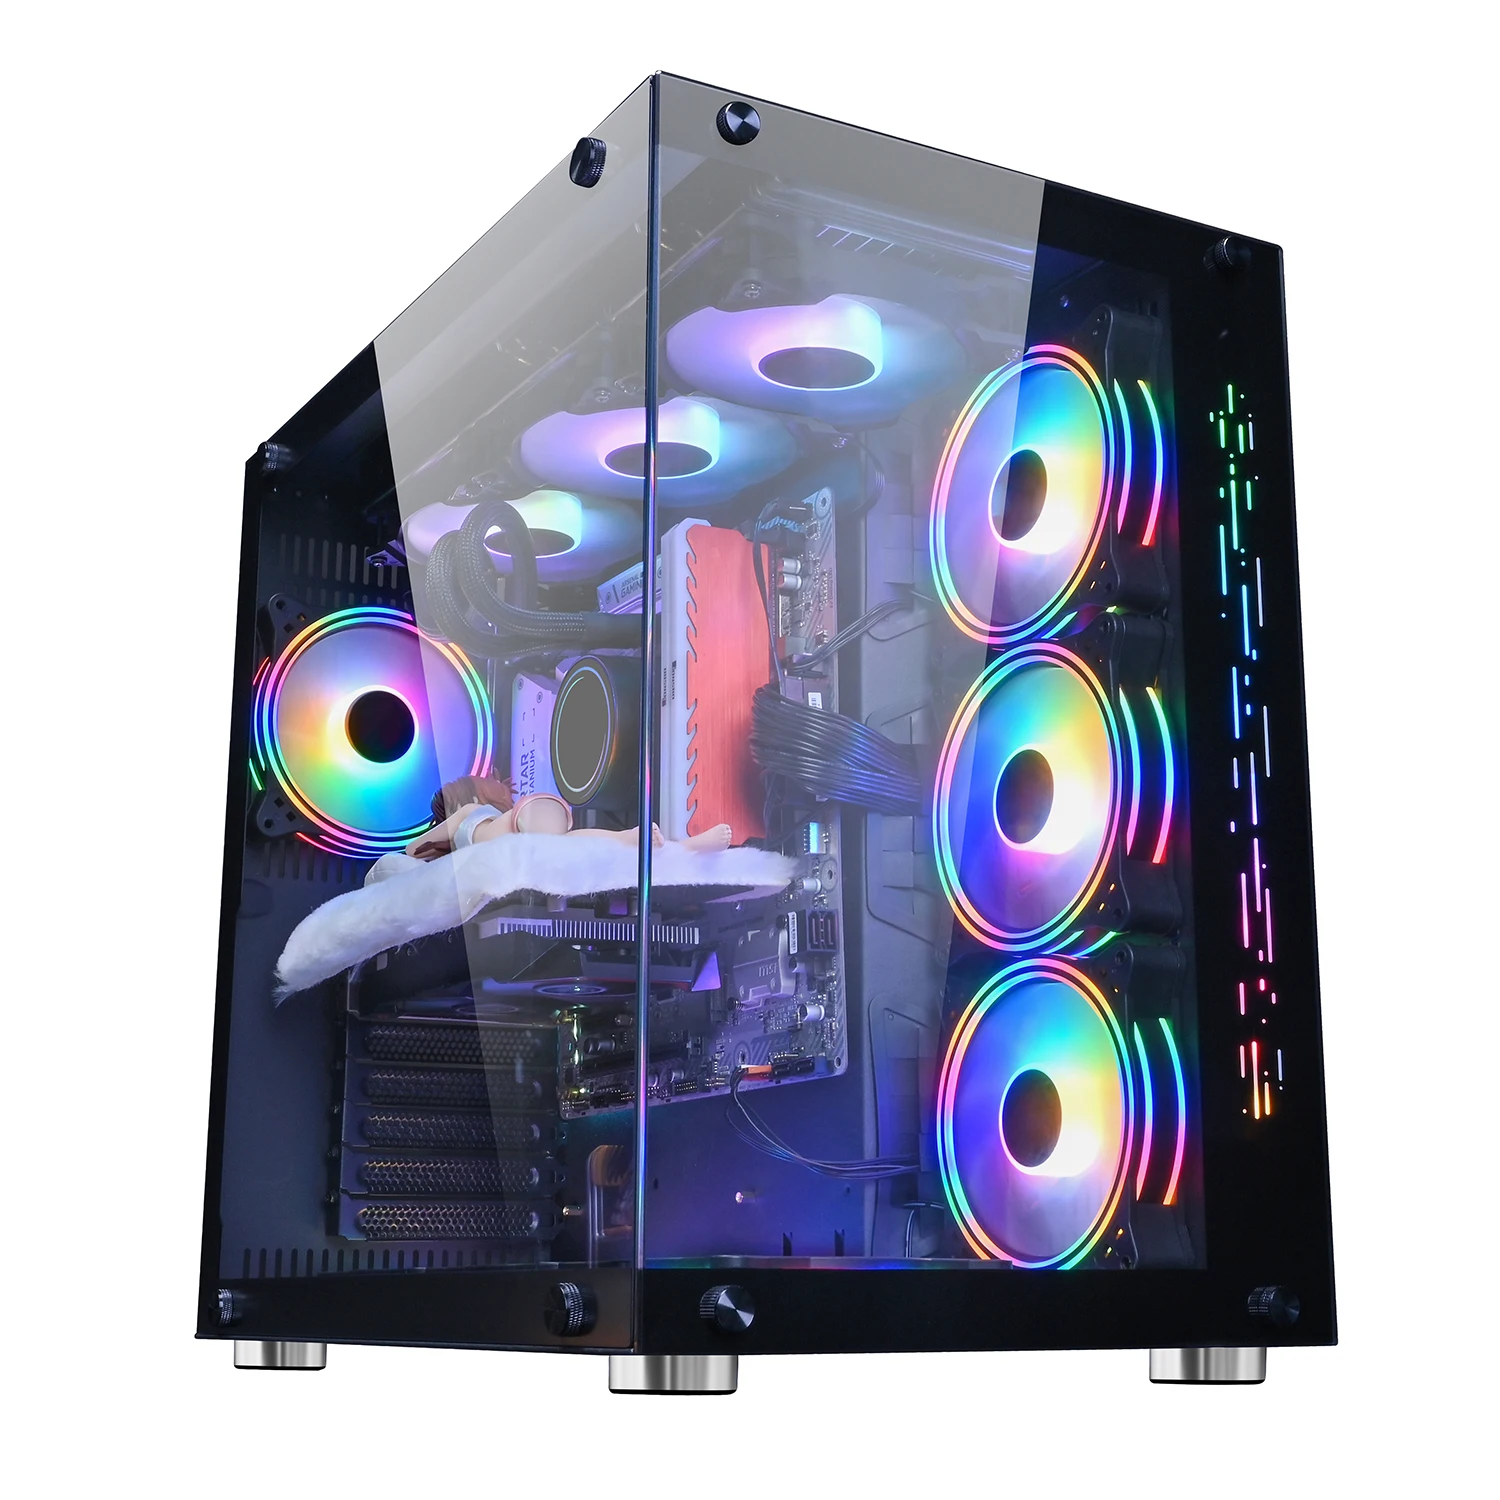 12 Bay Fan Filter Darkflash Luobin 2 Tempered Glass Orizzontale Del Atx Pc  Computer Case - Buy Gaming Pc Ase,Pc Case,Computer Pc Case Gaming Product  